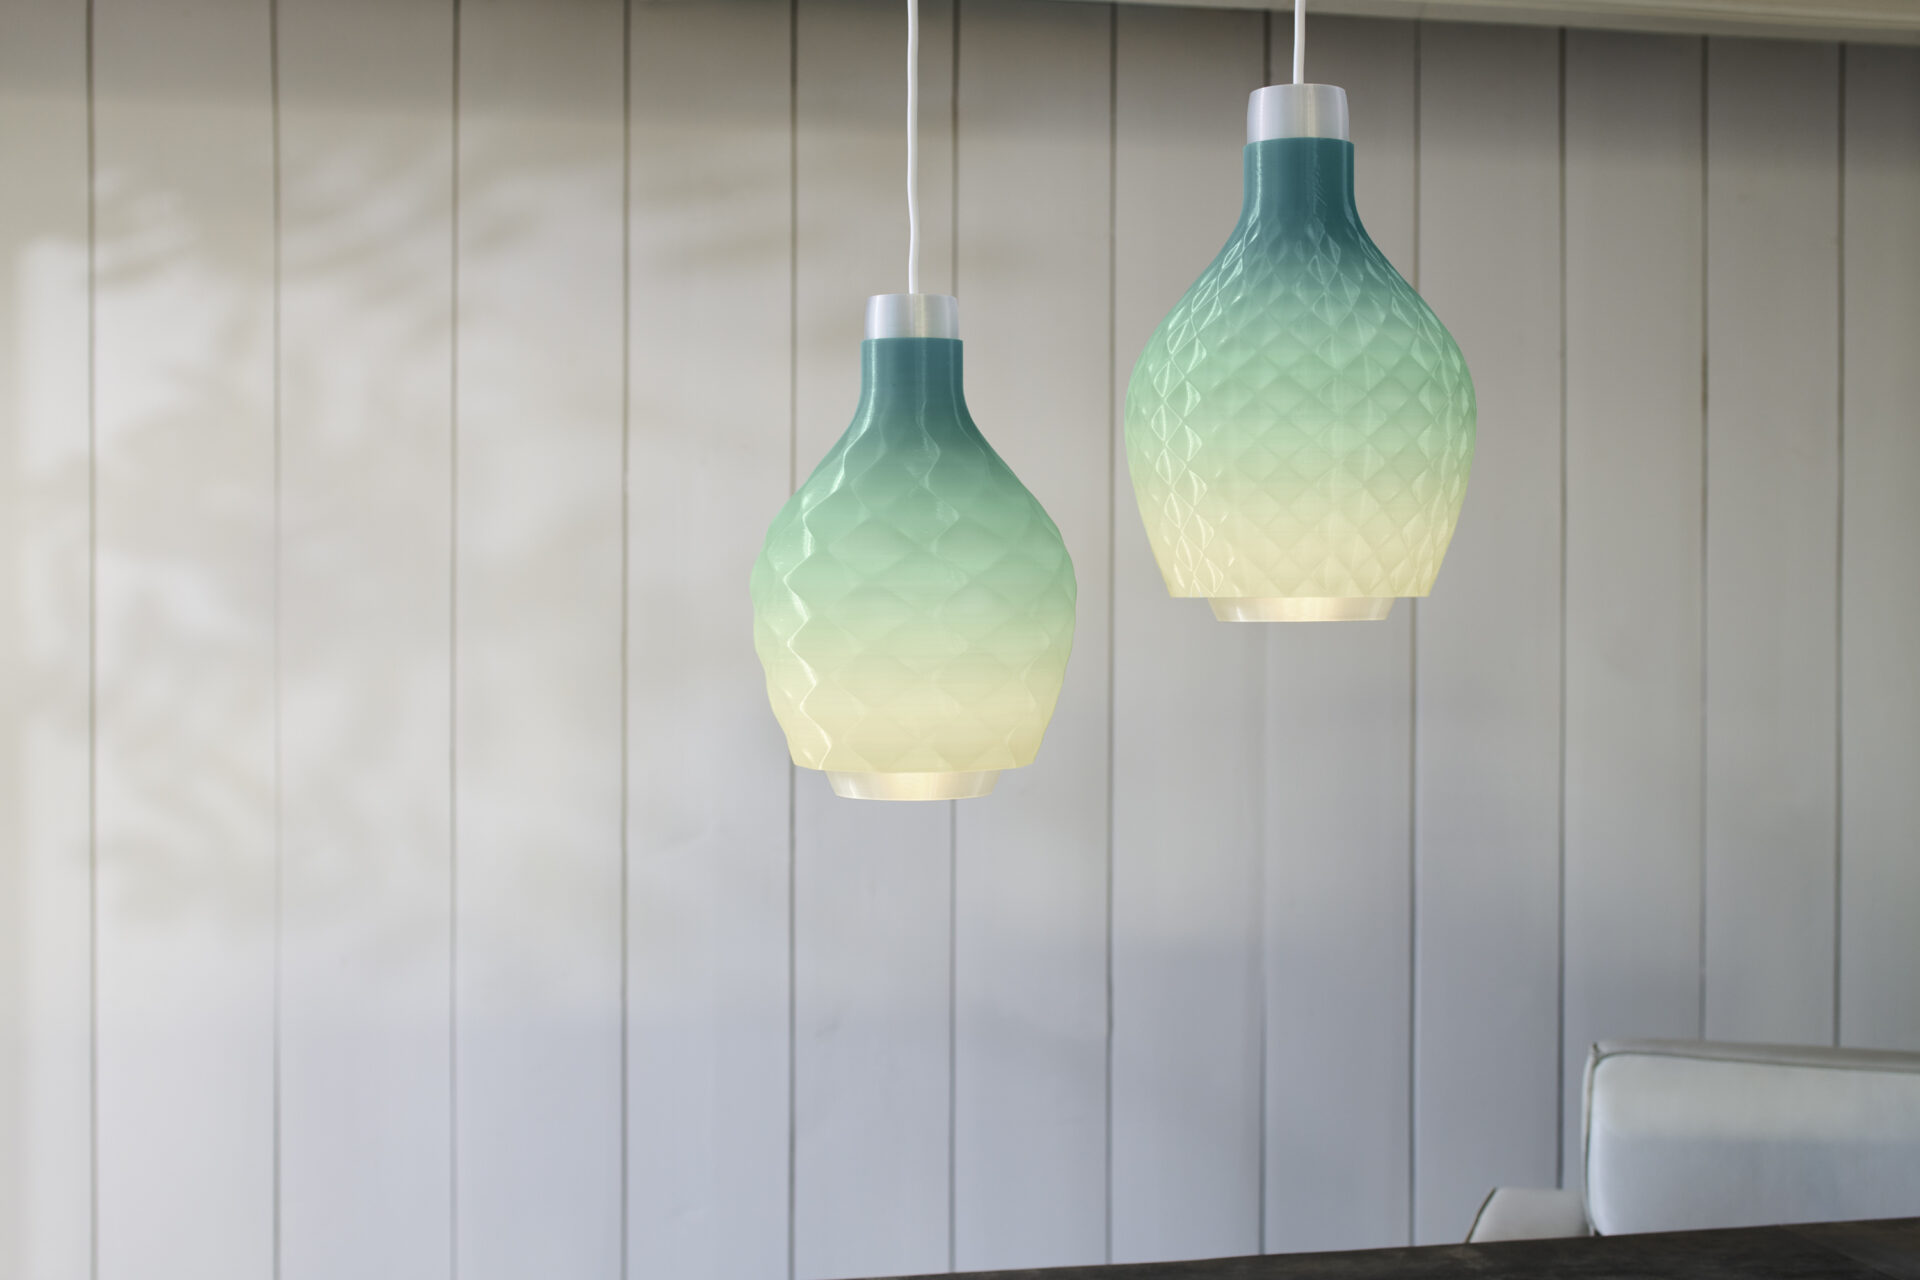 3D printed lamp made from 100� fishnet 1920x1280 1